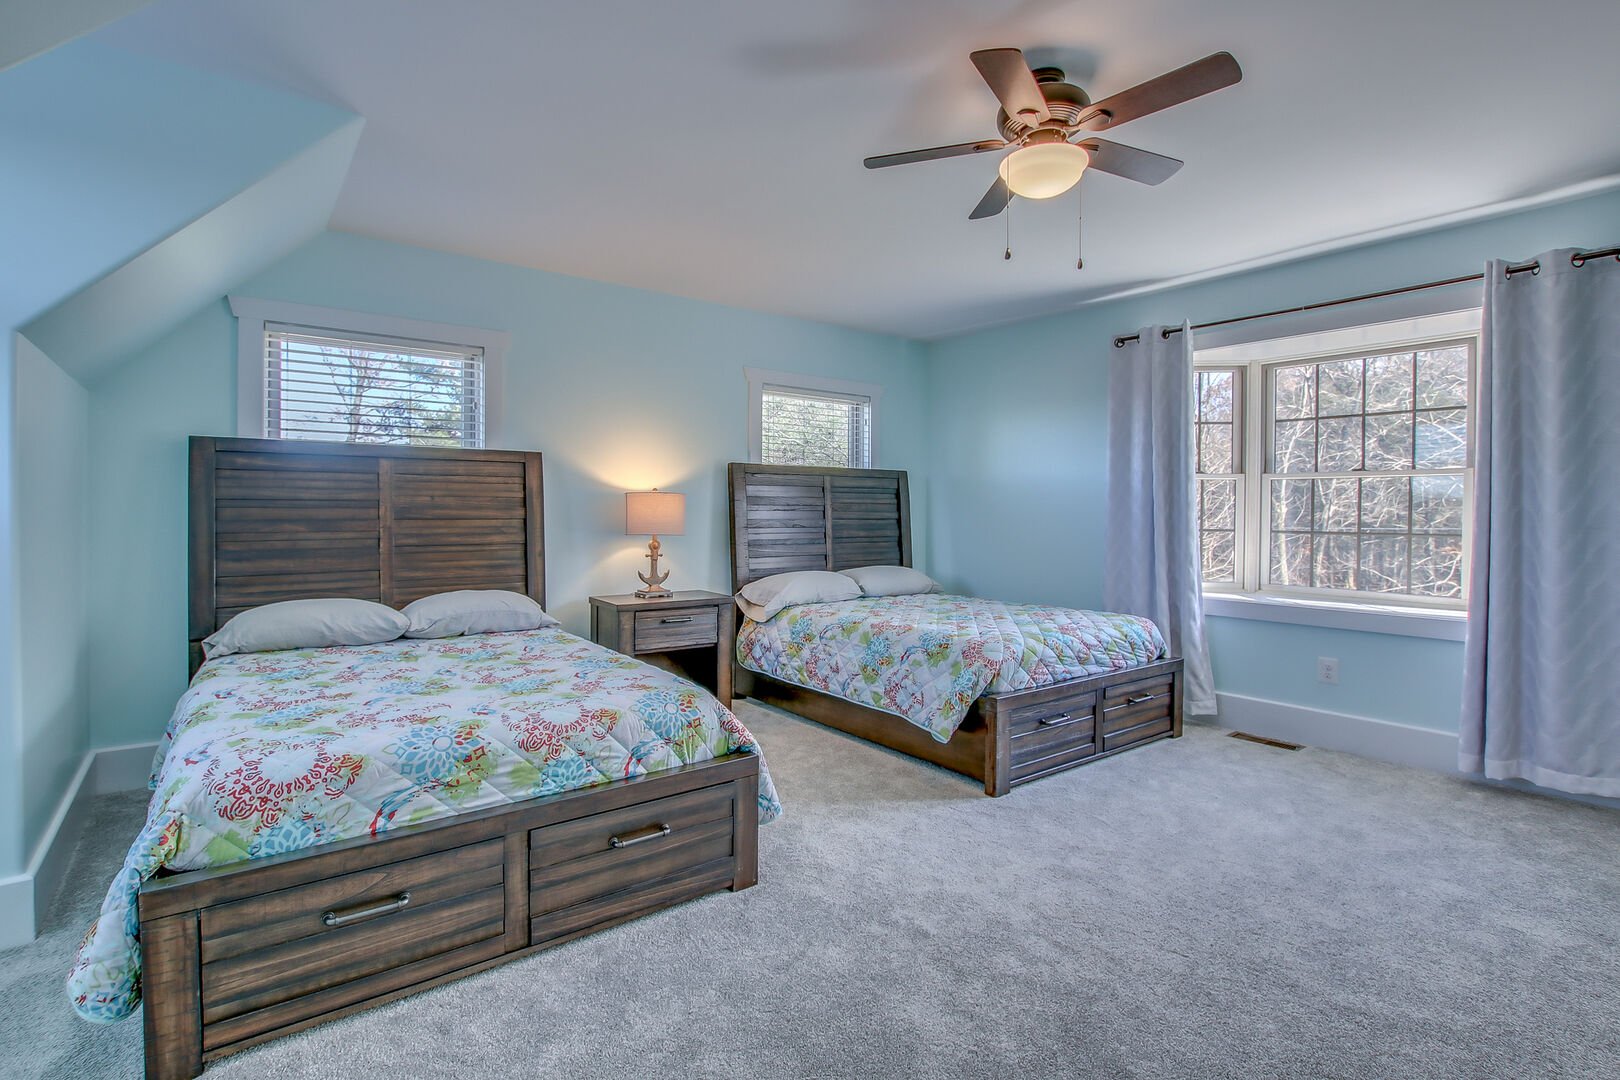 Two beds side by side in one of the bedrooms of this Poconos rental  by the lake, with a nightstand in between.